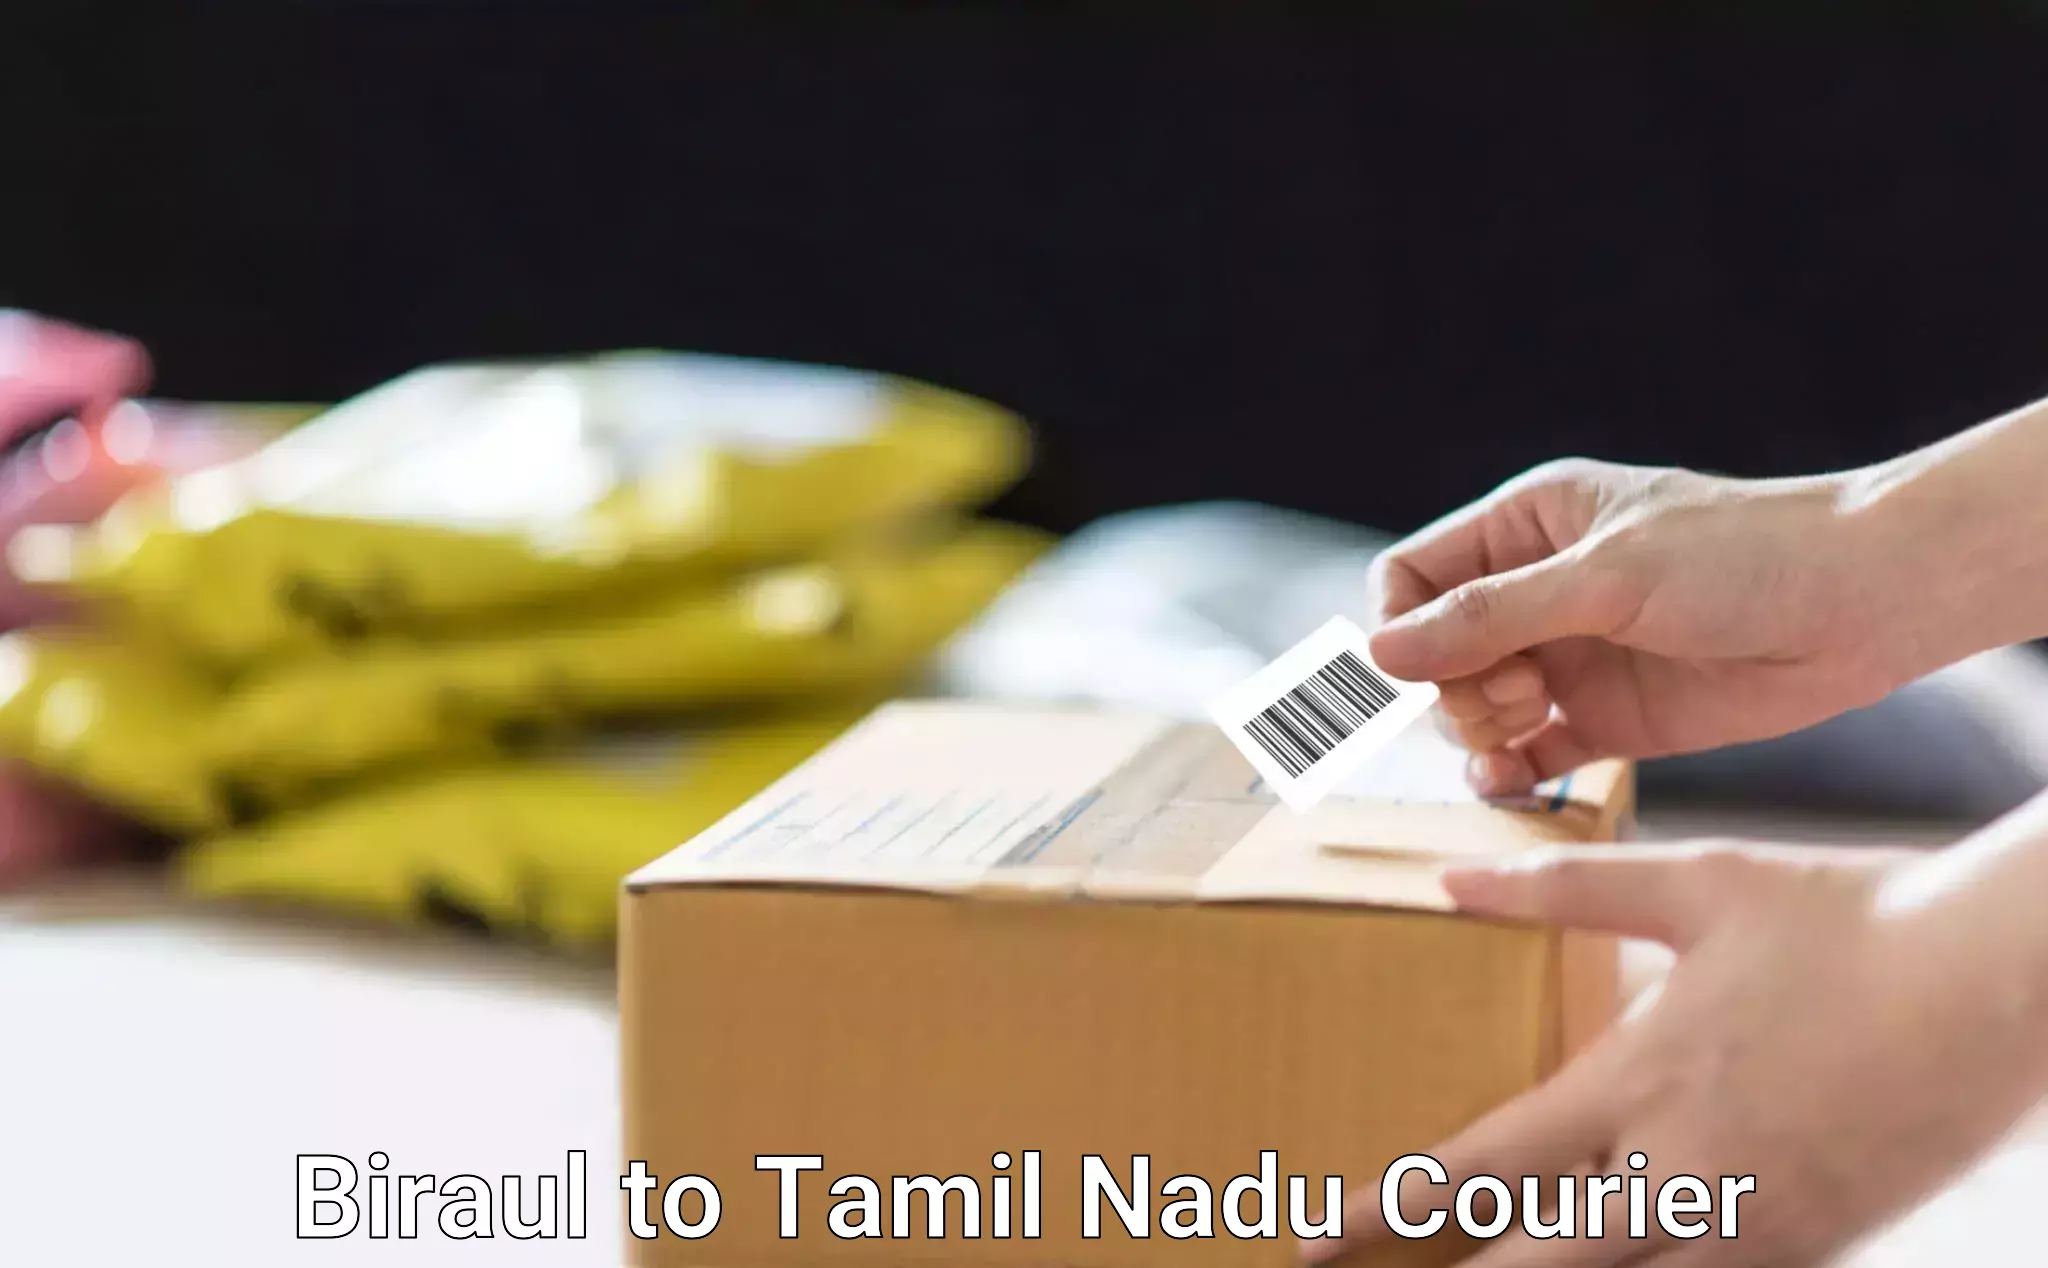 Personalized moving service Biraul to Tamil Nadu